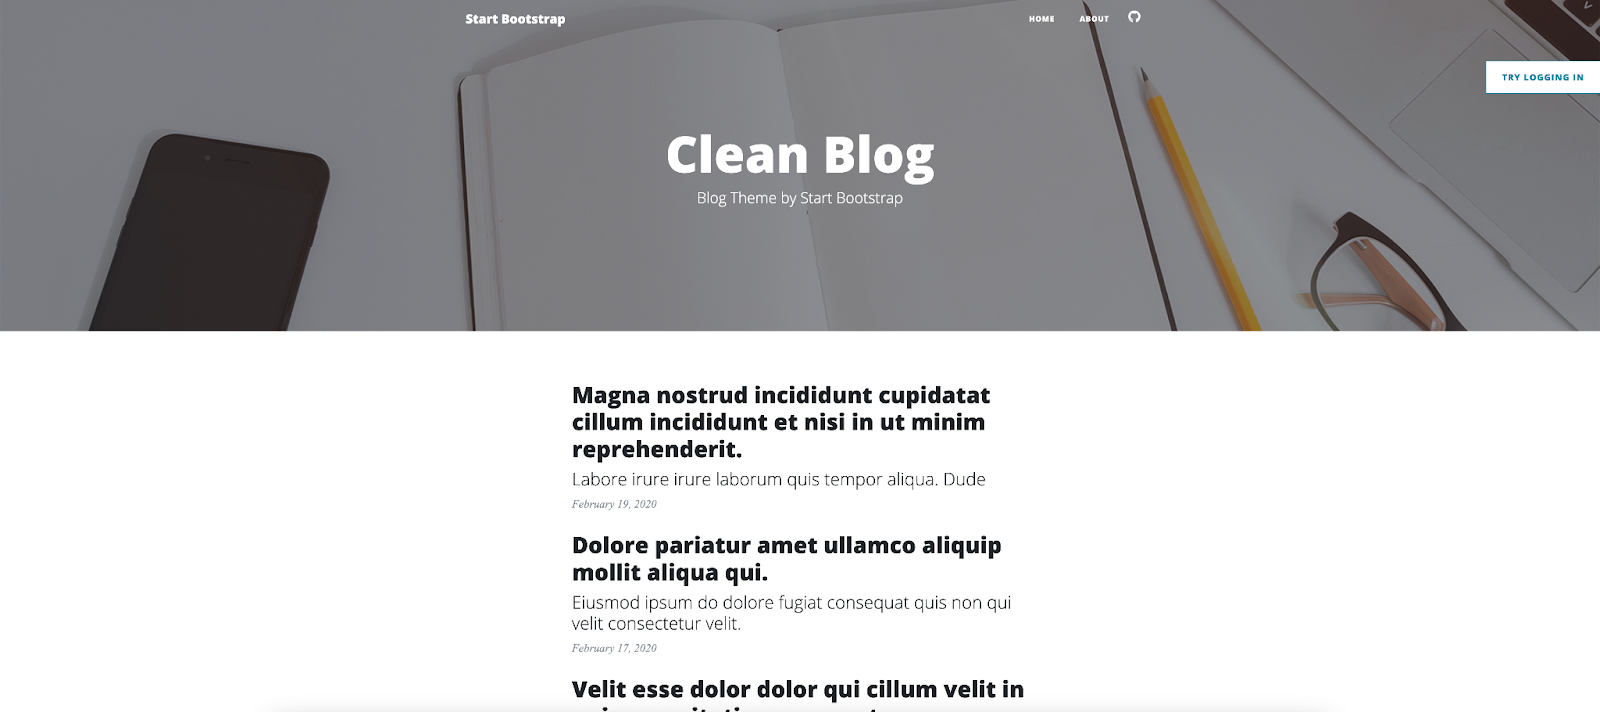 Using the Angular platform, the Clean Blog Angular theme is a modern, simple design for your blog or business website